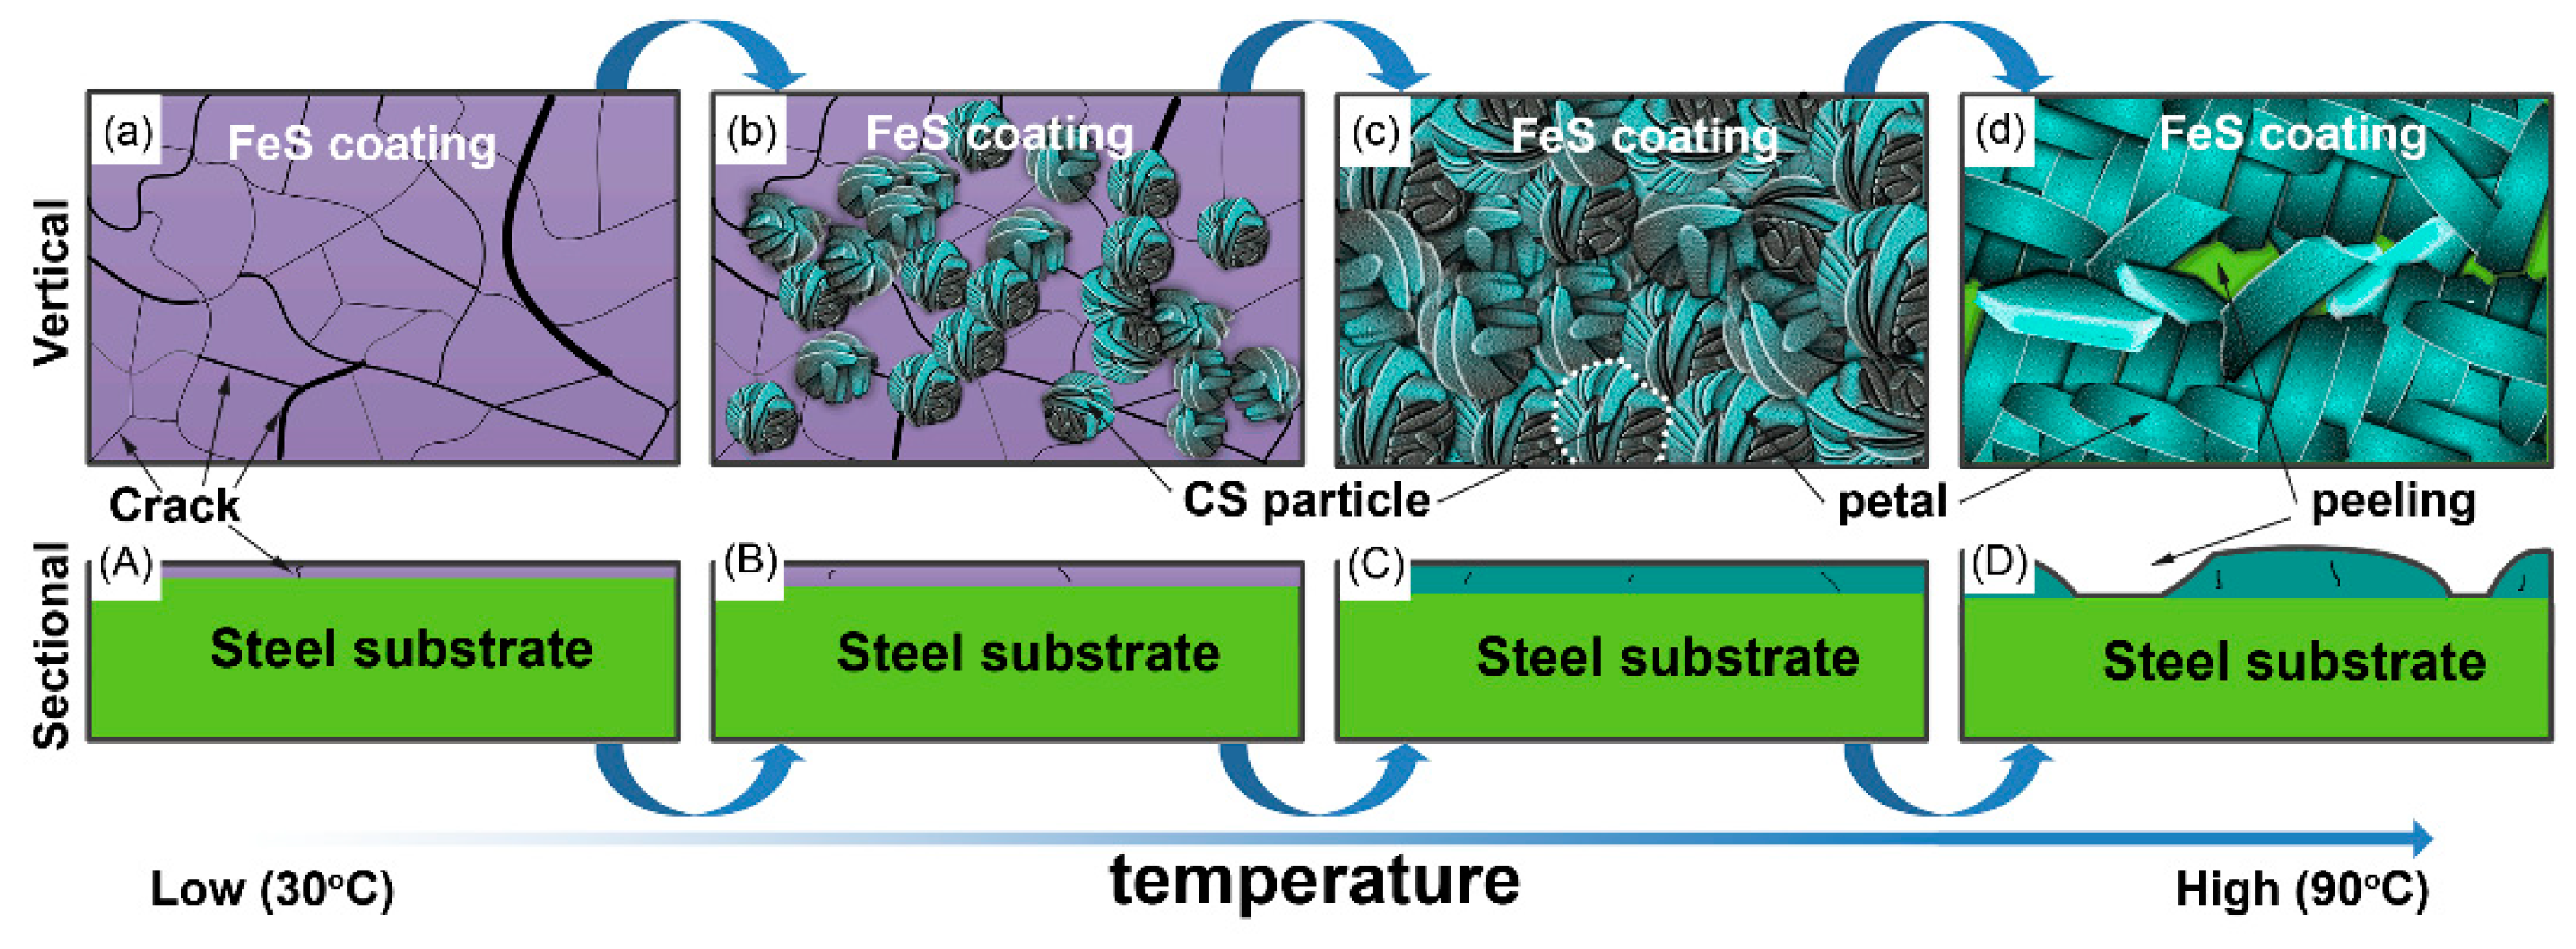 Applied Sciences | Free Full-Text | Microstructure and Tribological  Properties of Self-Lubricating FeS Coating Prepared by Chemical Bath  Deposition Coating Technique